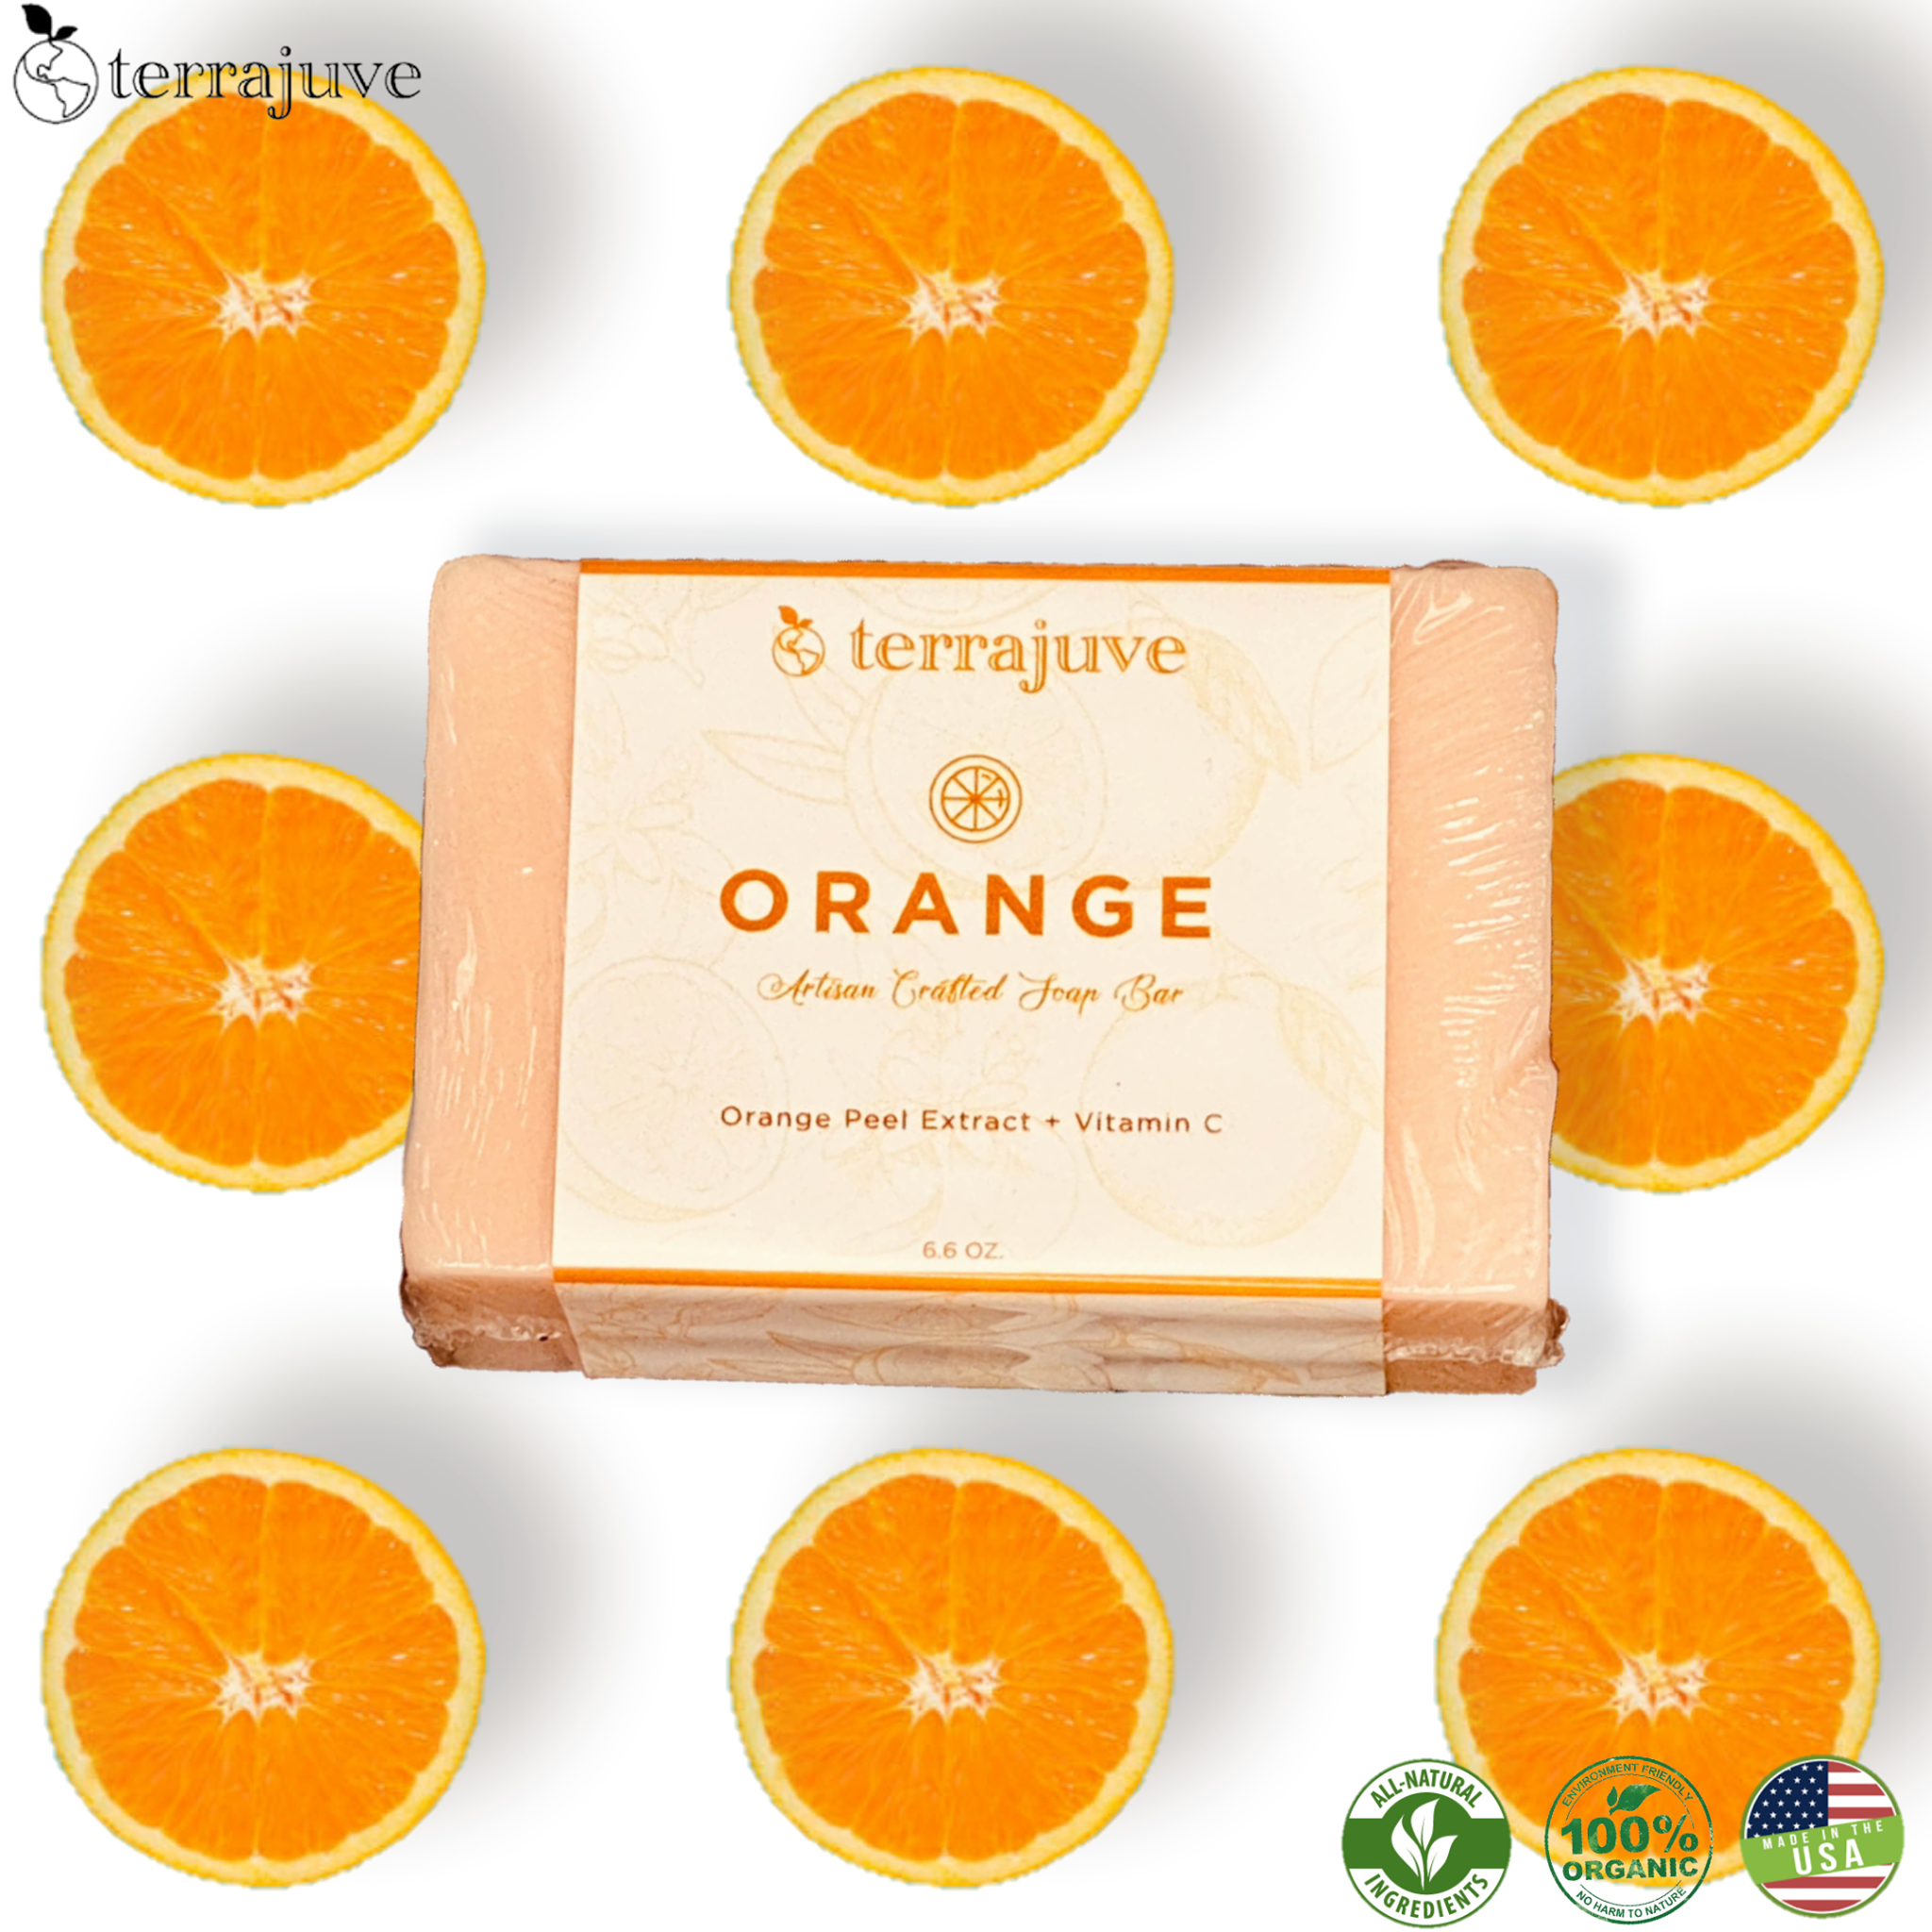 Large 6.4 oz Vitamin C Triple Butter with Orange Peel Powder, All Natural, 100% Organic, Made in the USA